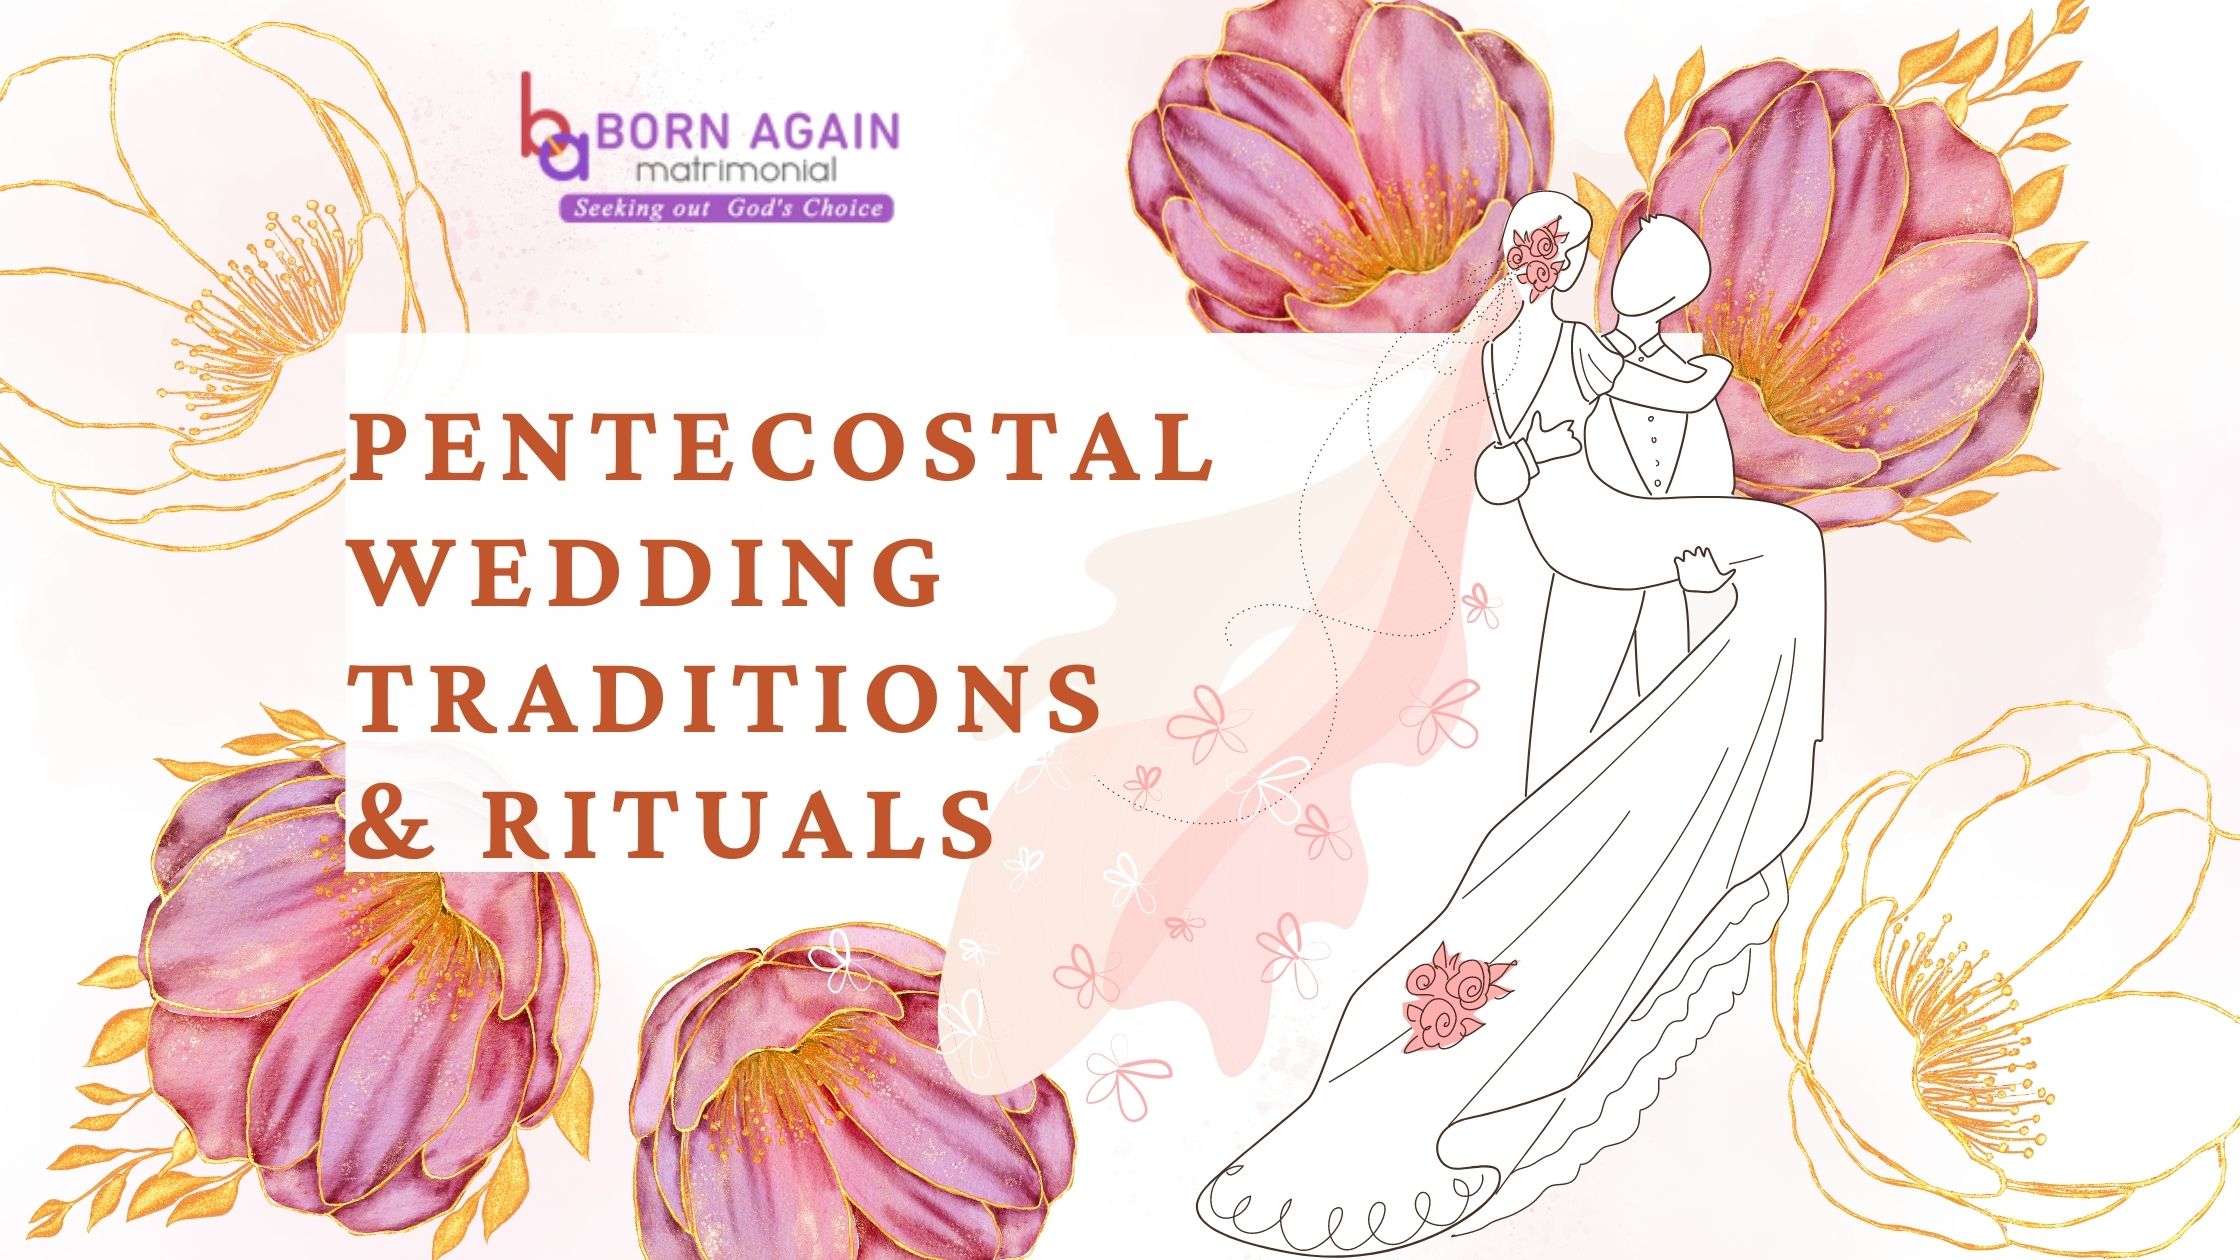 Pentecostal wedding traditions and rituals